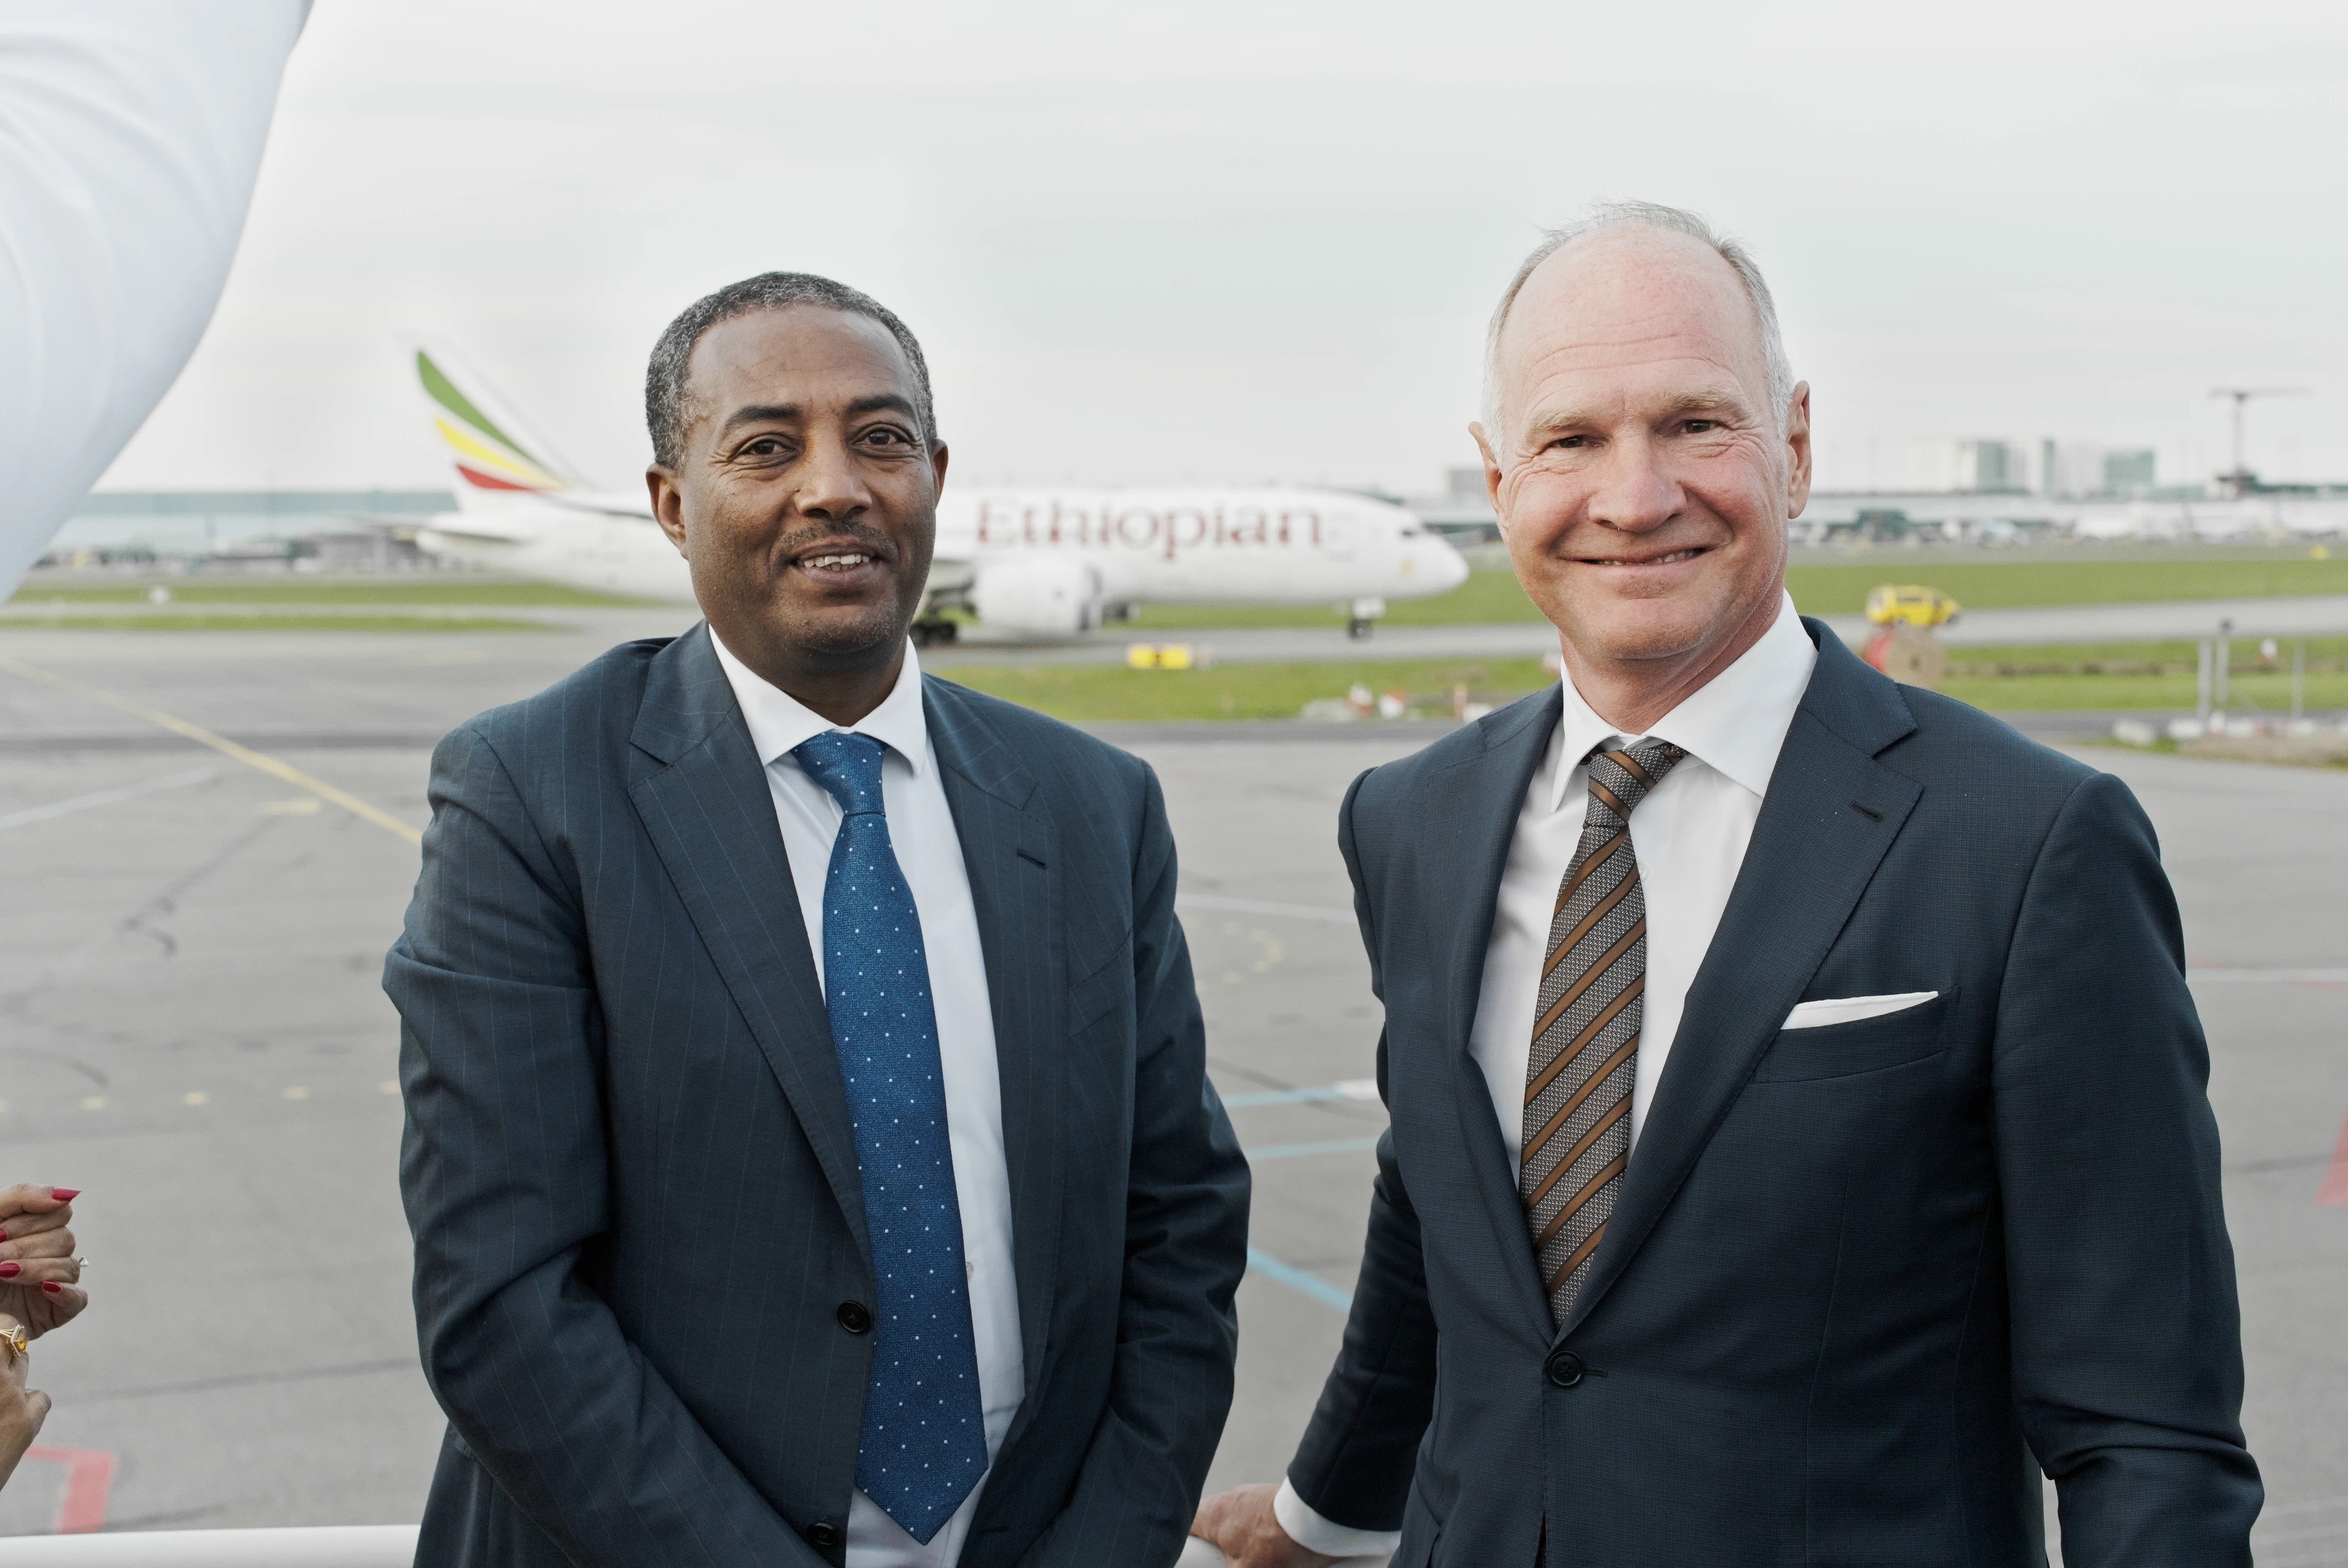 Ethiopian Airlines Inaugural Event at CPH